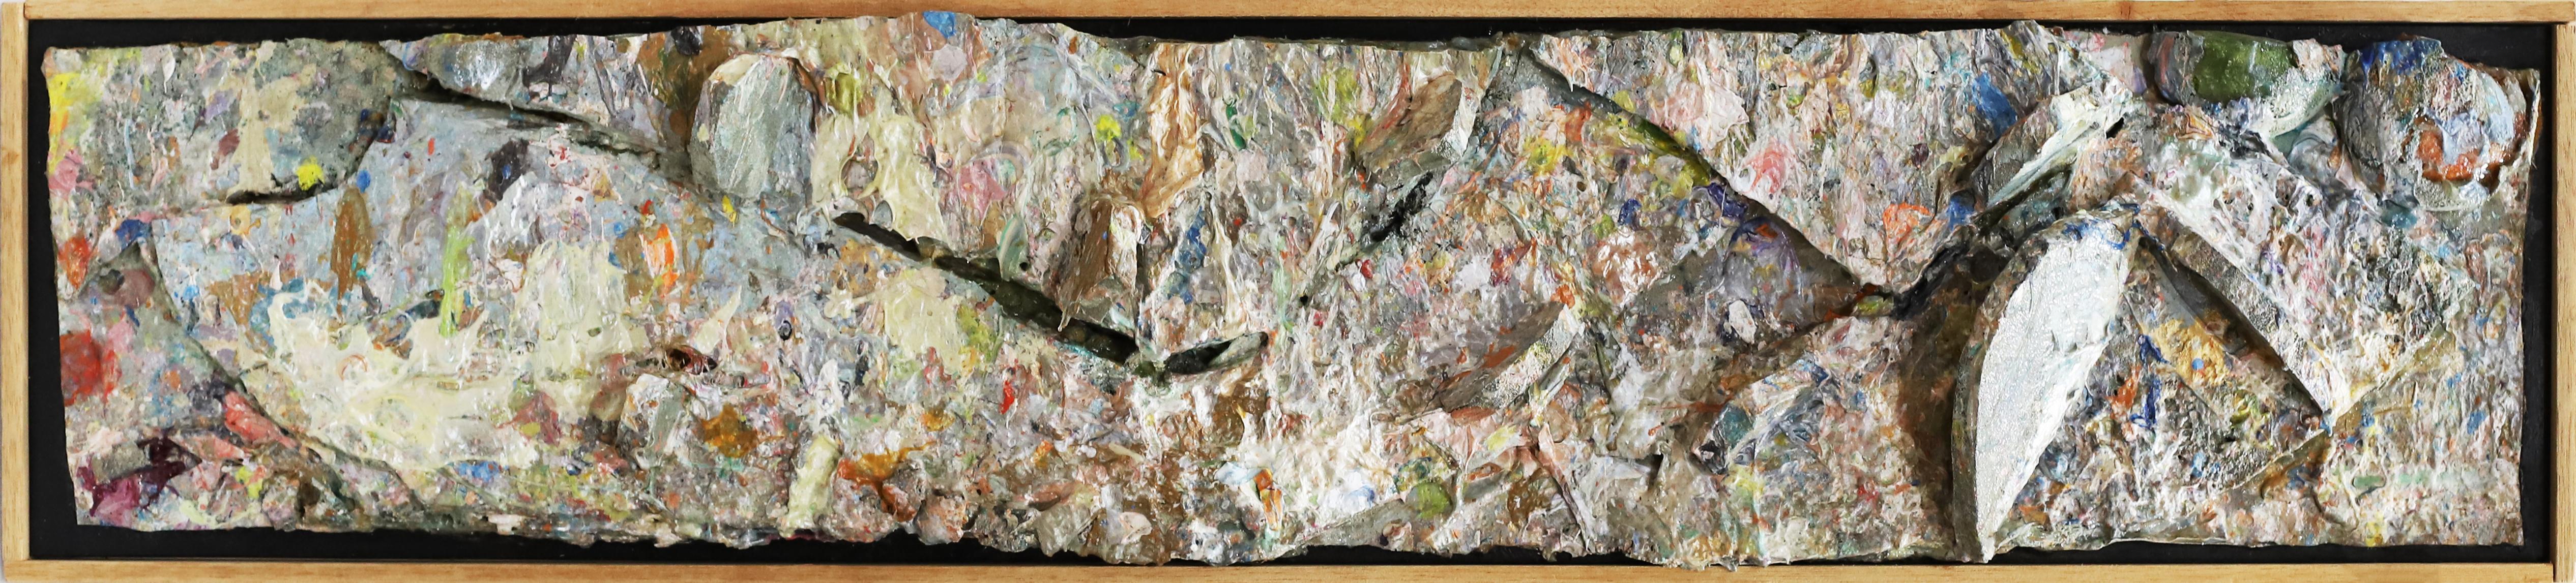 Larry Poons, Untitled 89AS-1, 1989